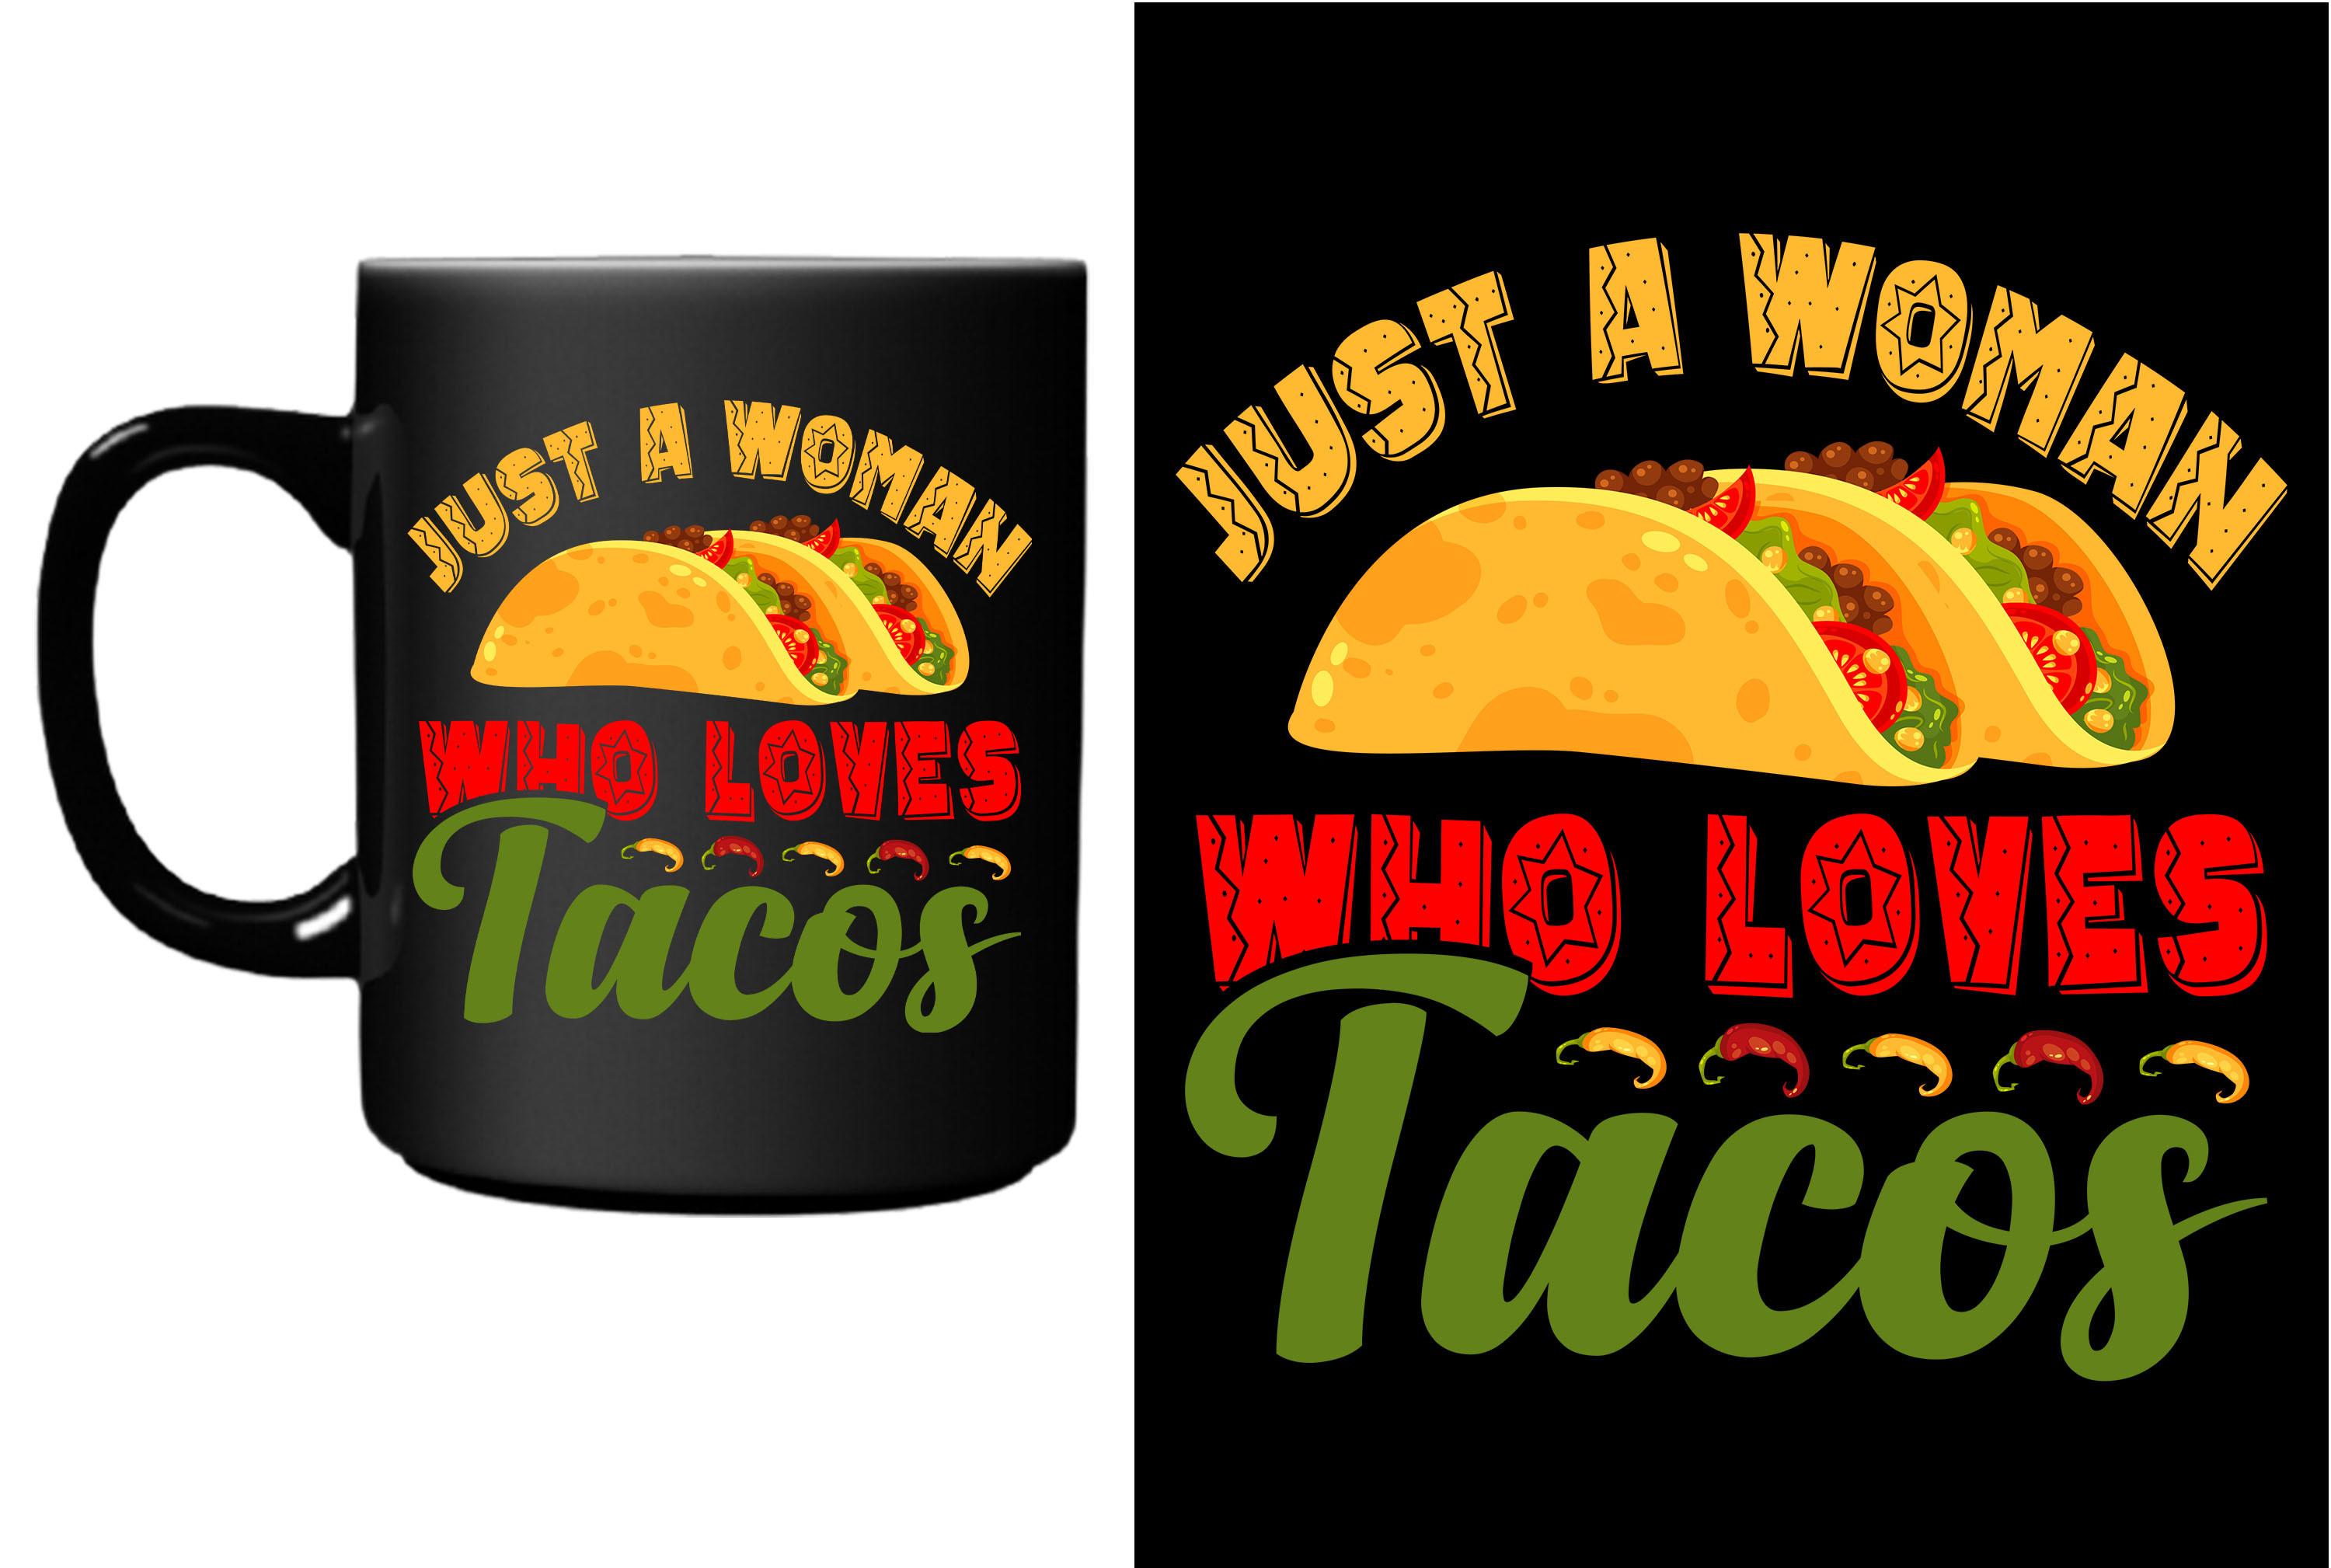 Just a Woman Who Loves Tacos